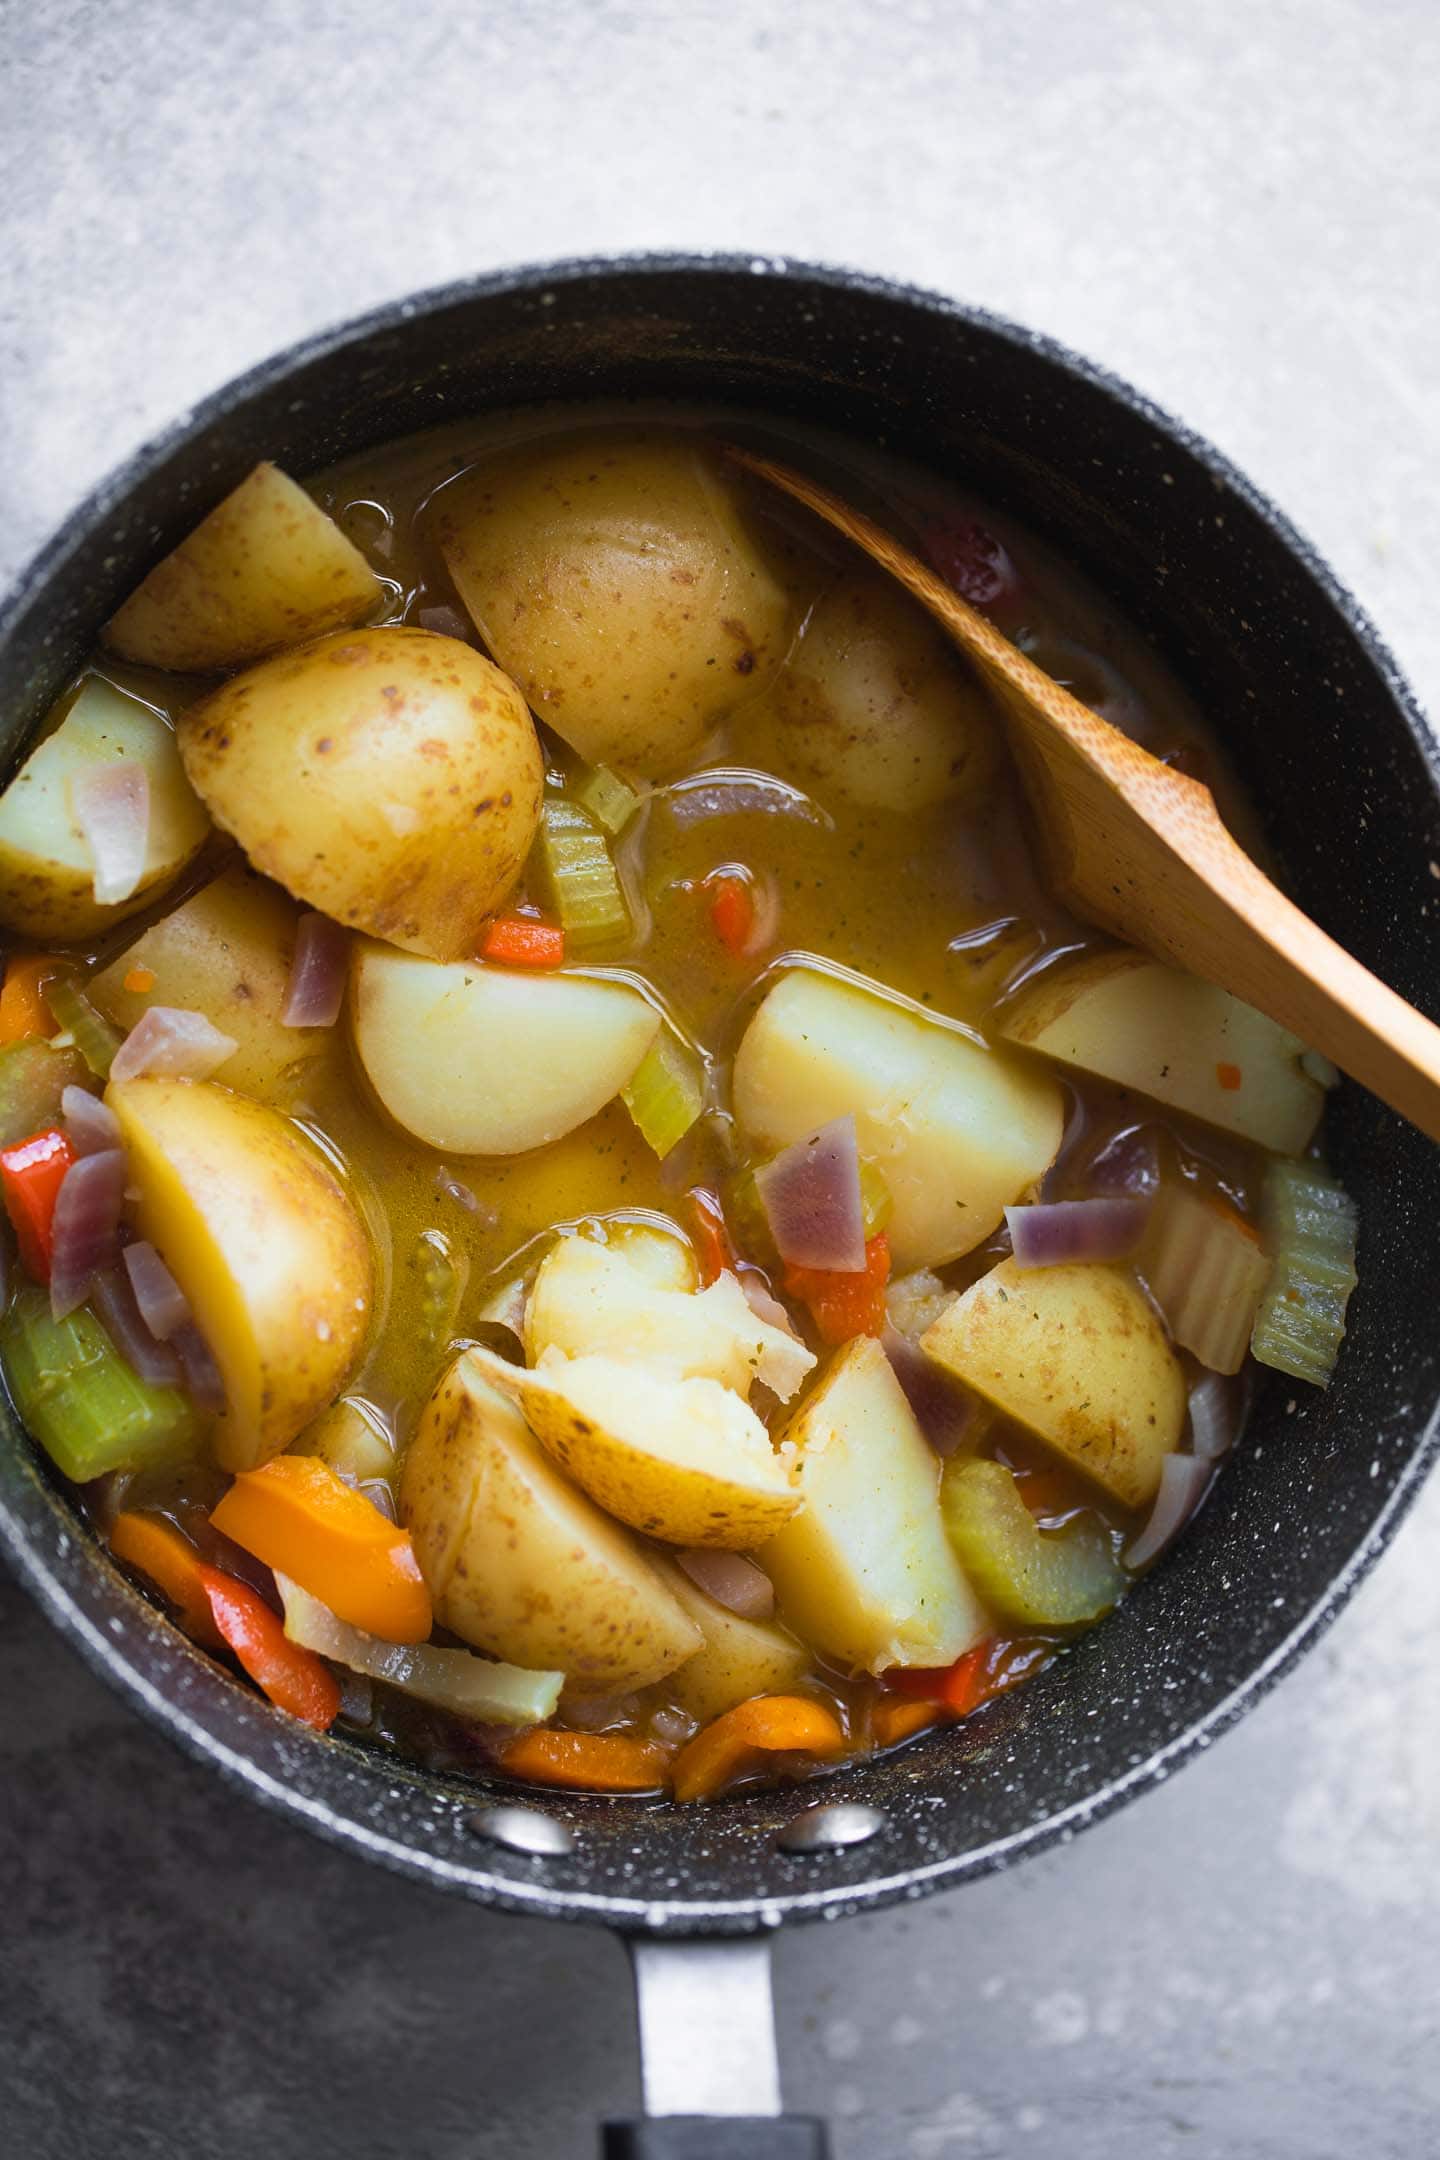 Potatoes and vegetables in a saucepan